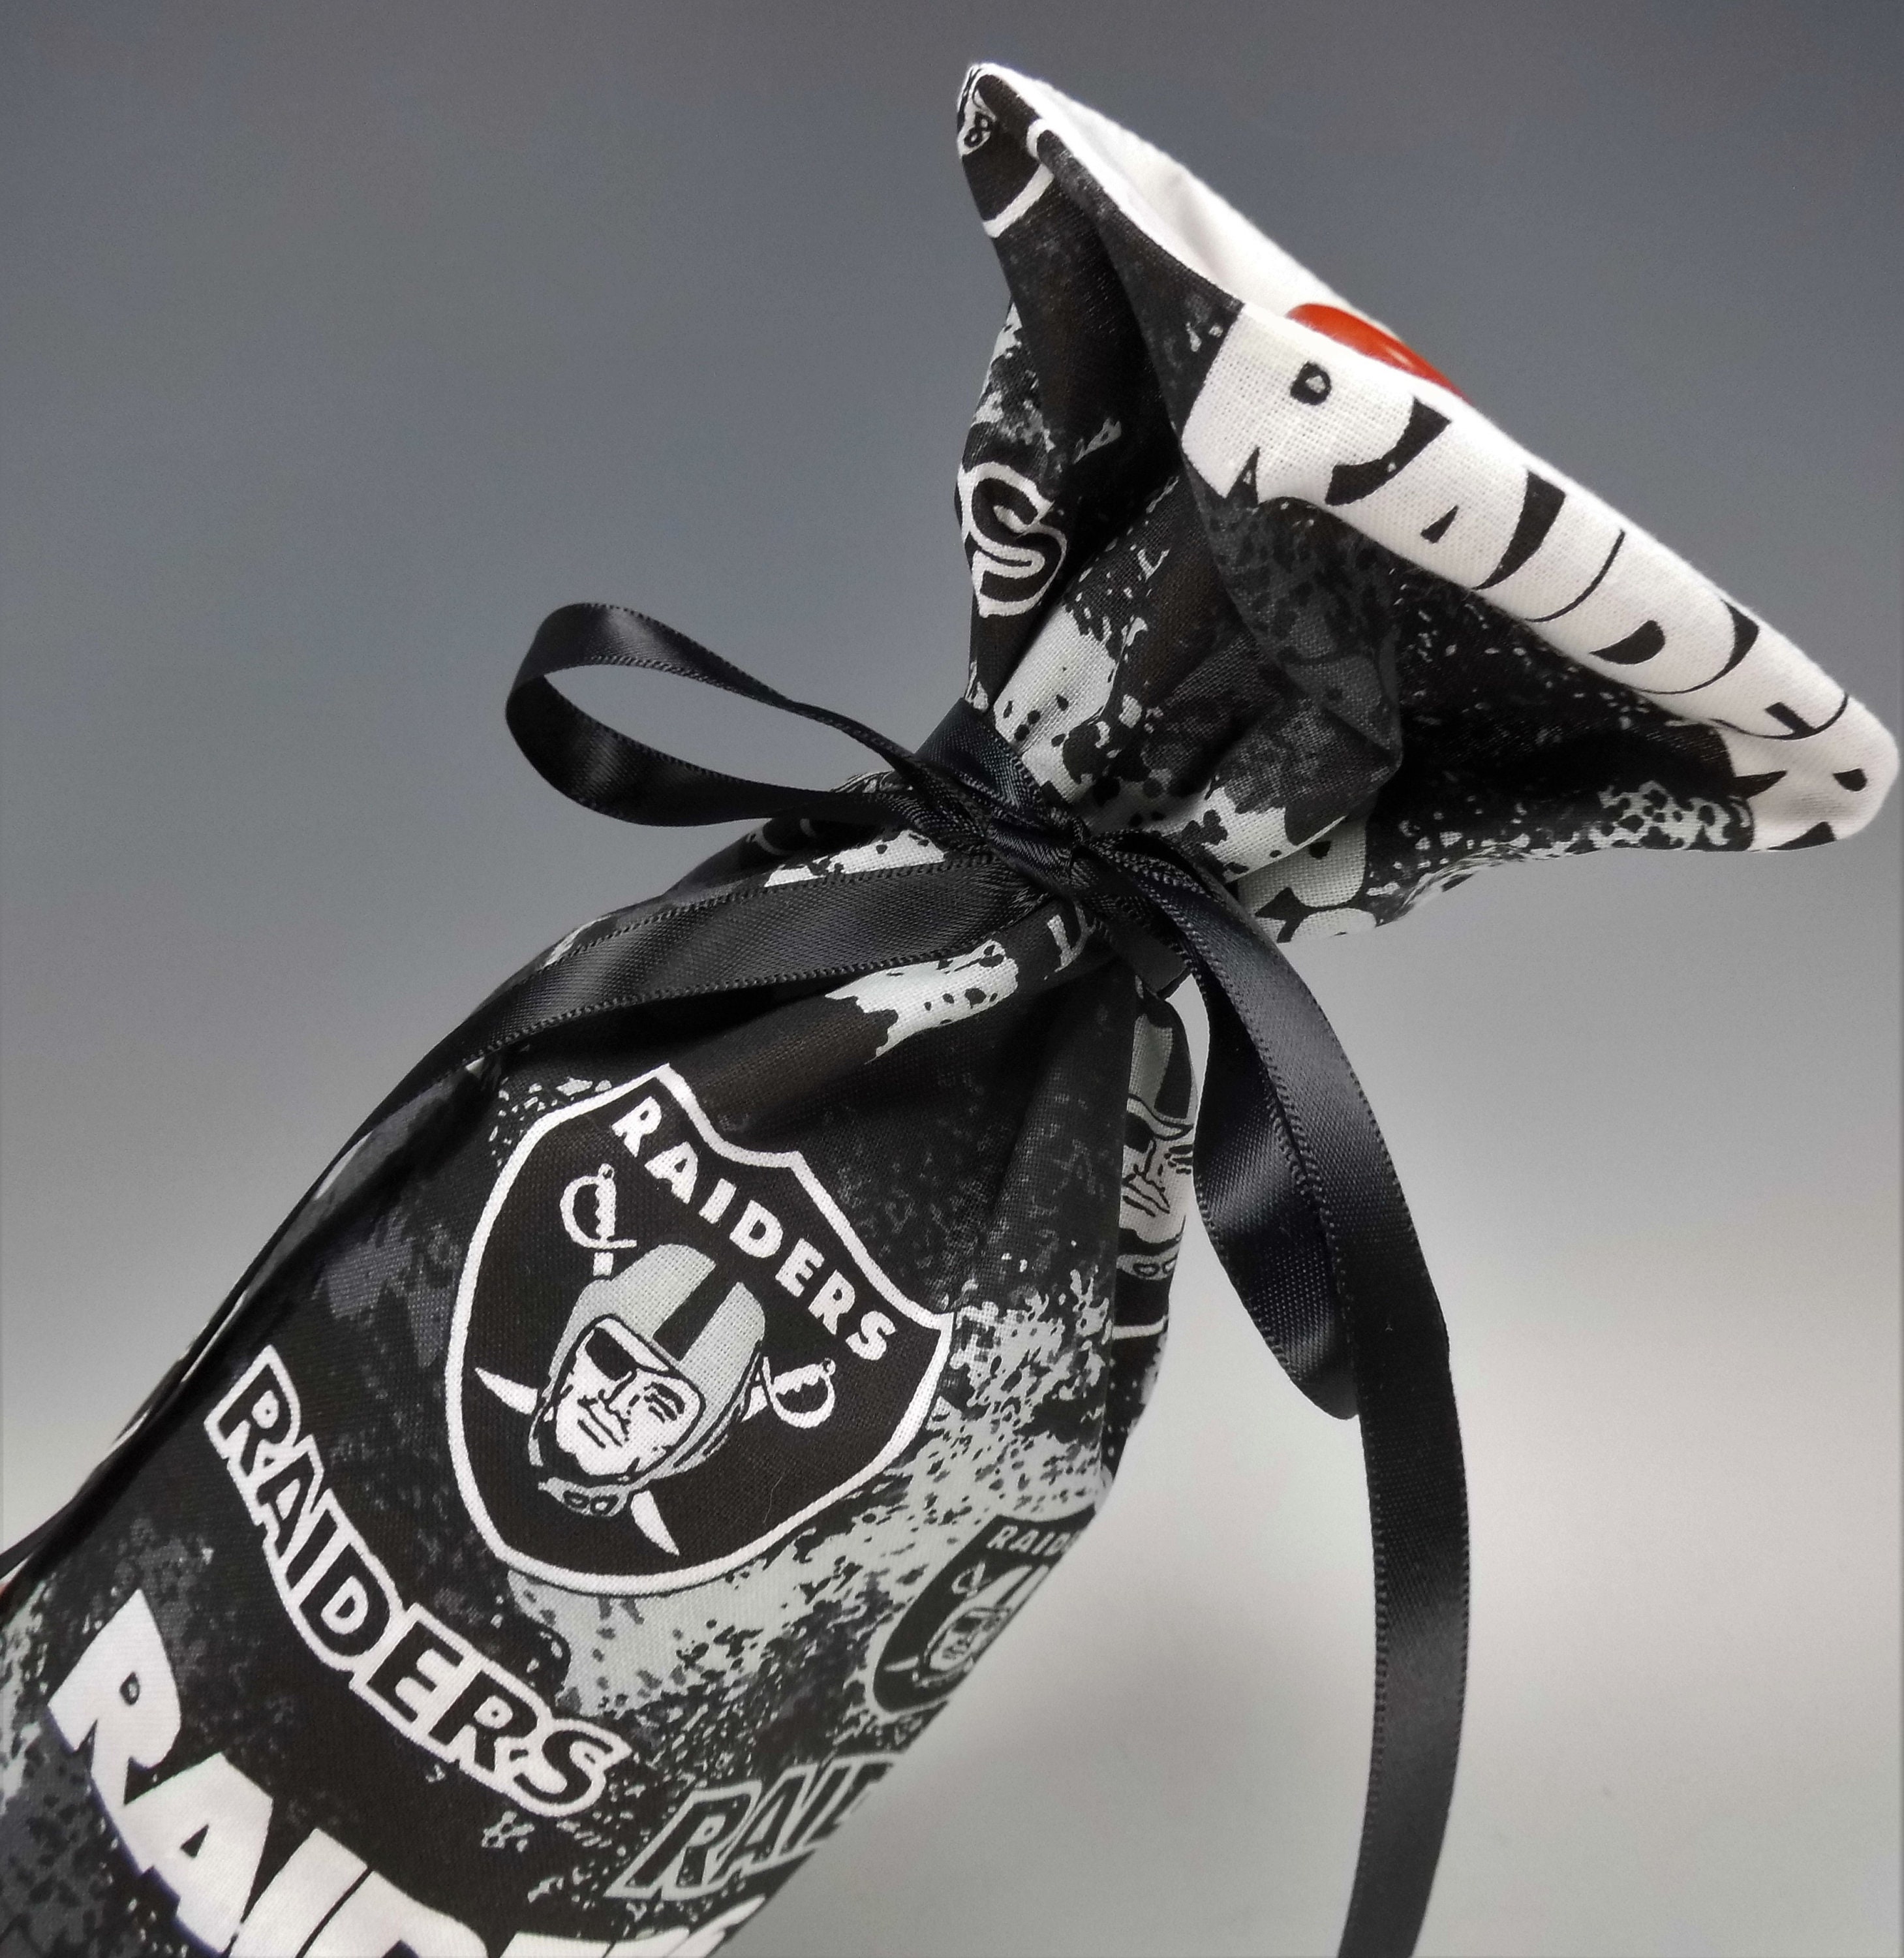 Wrapping Paper Raiders 